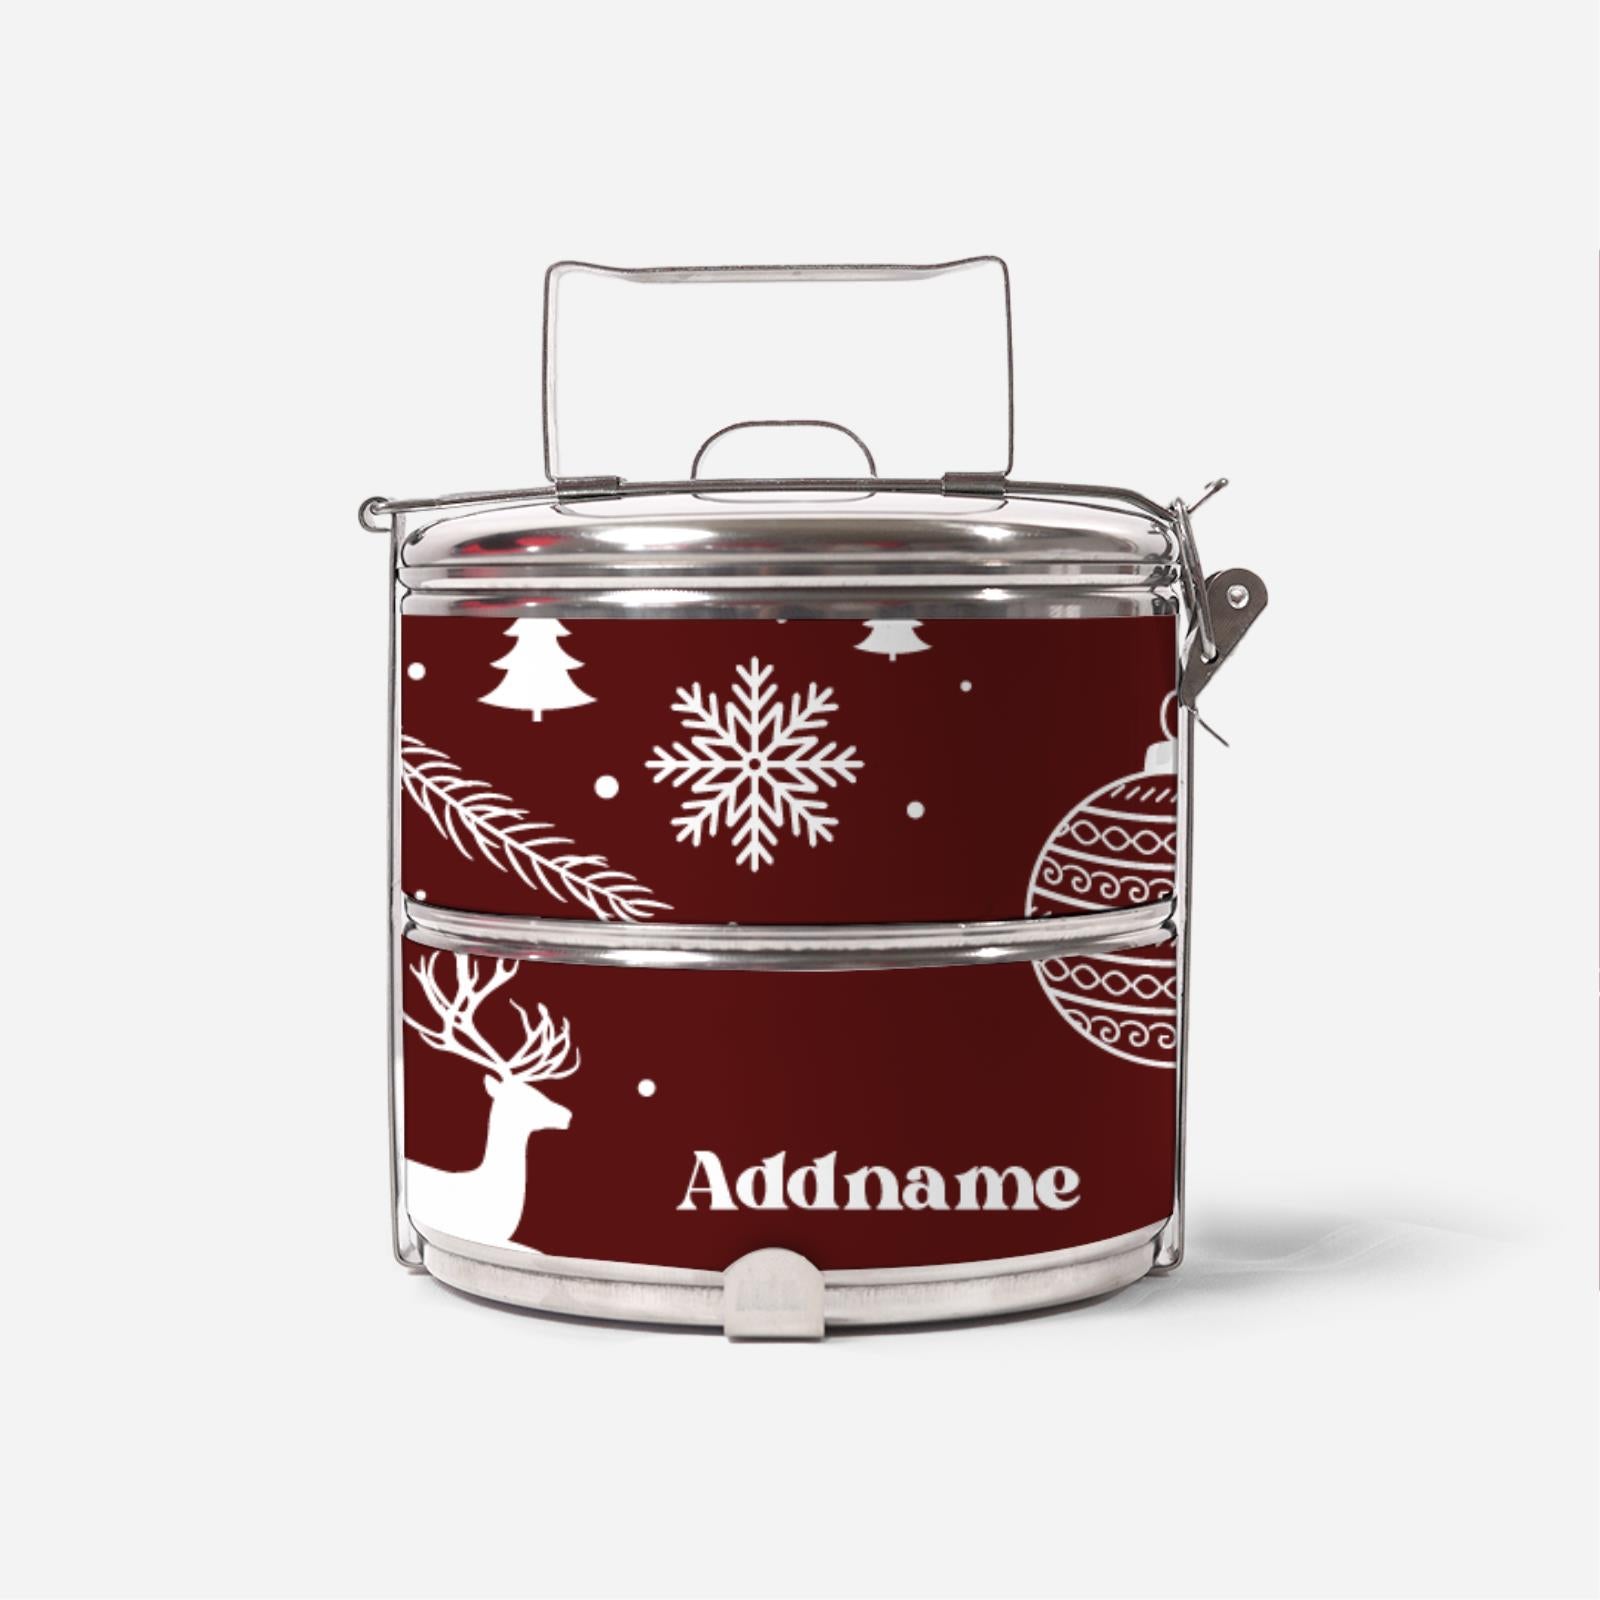 Christmas Series Standard Two Tier Standard Two Tier Tiffin Carrier - Jubilant Reindeers Red